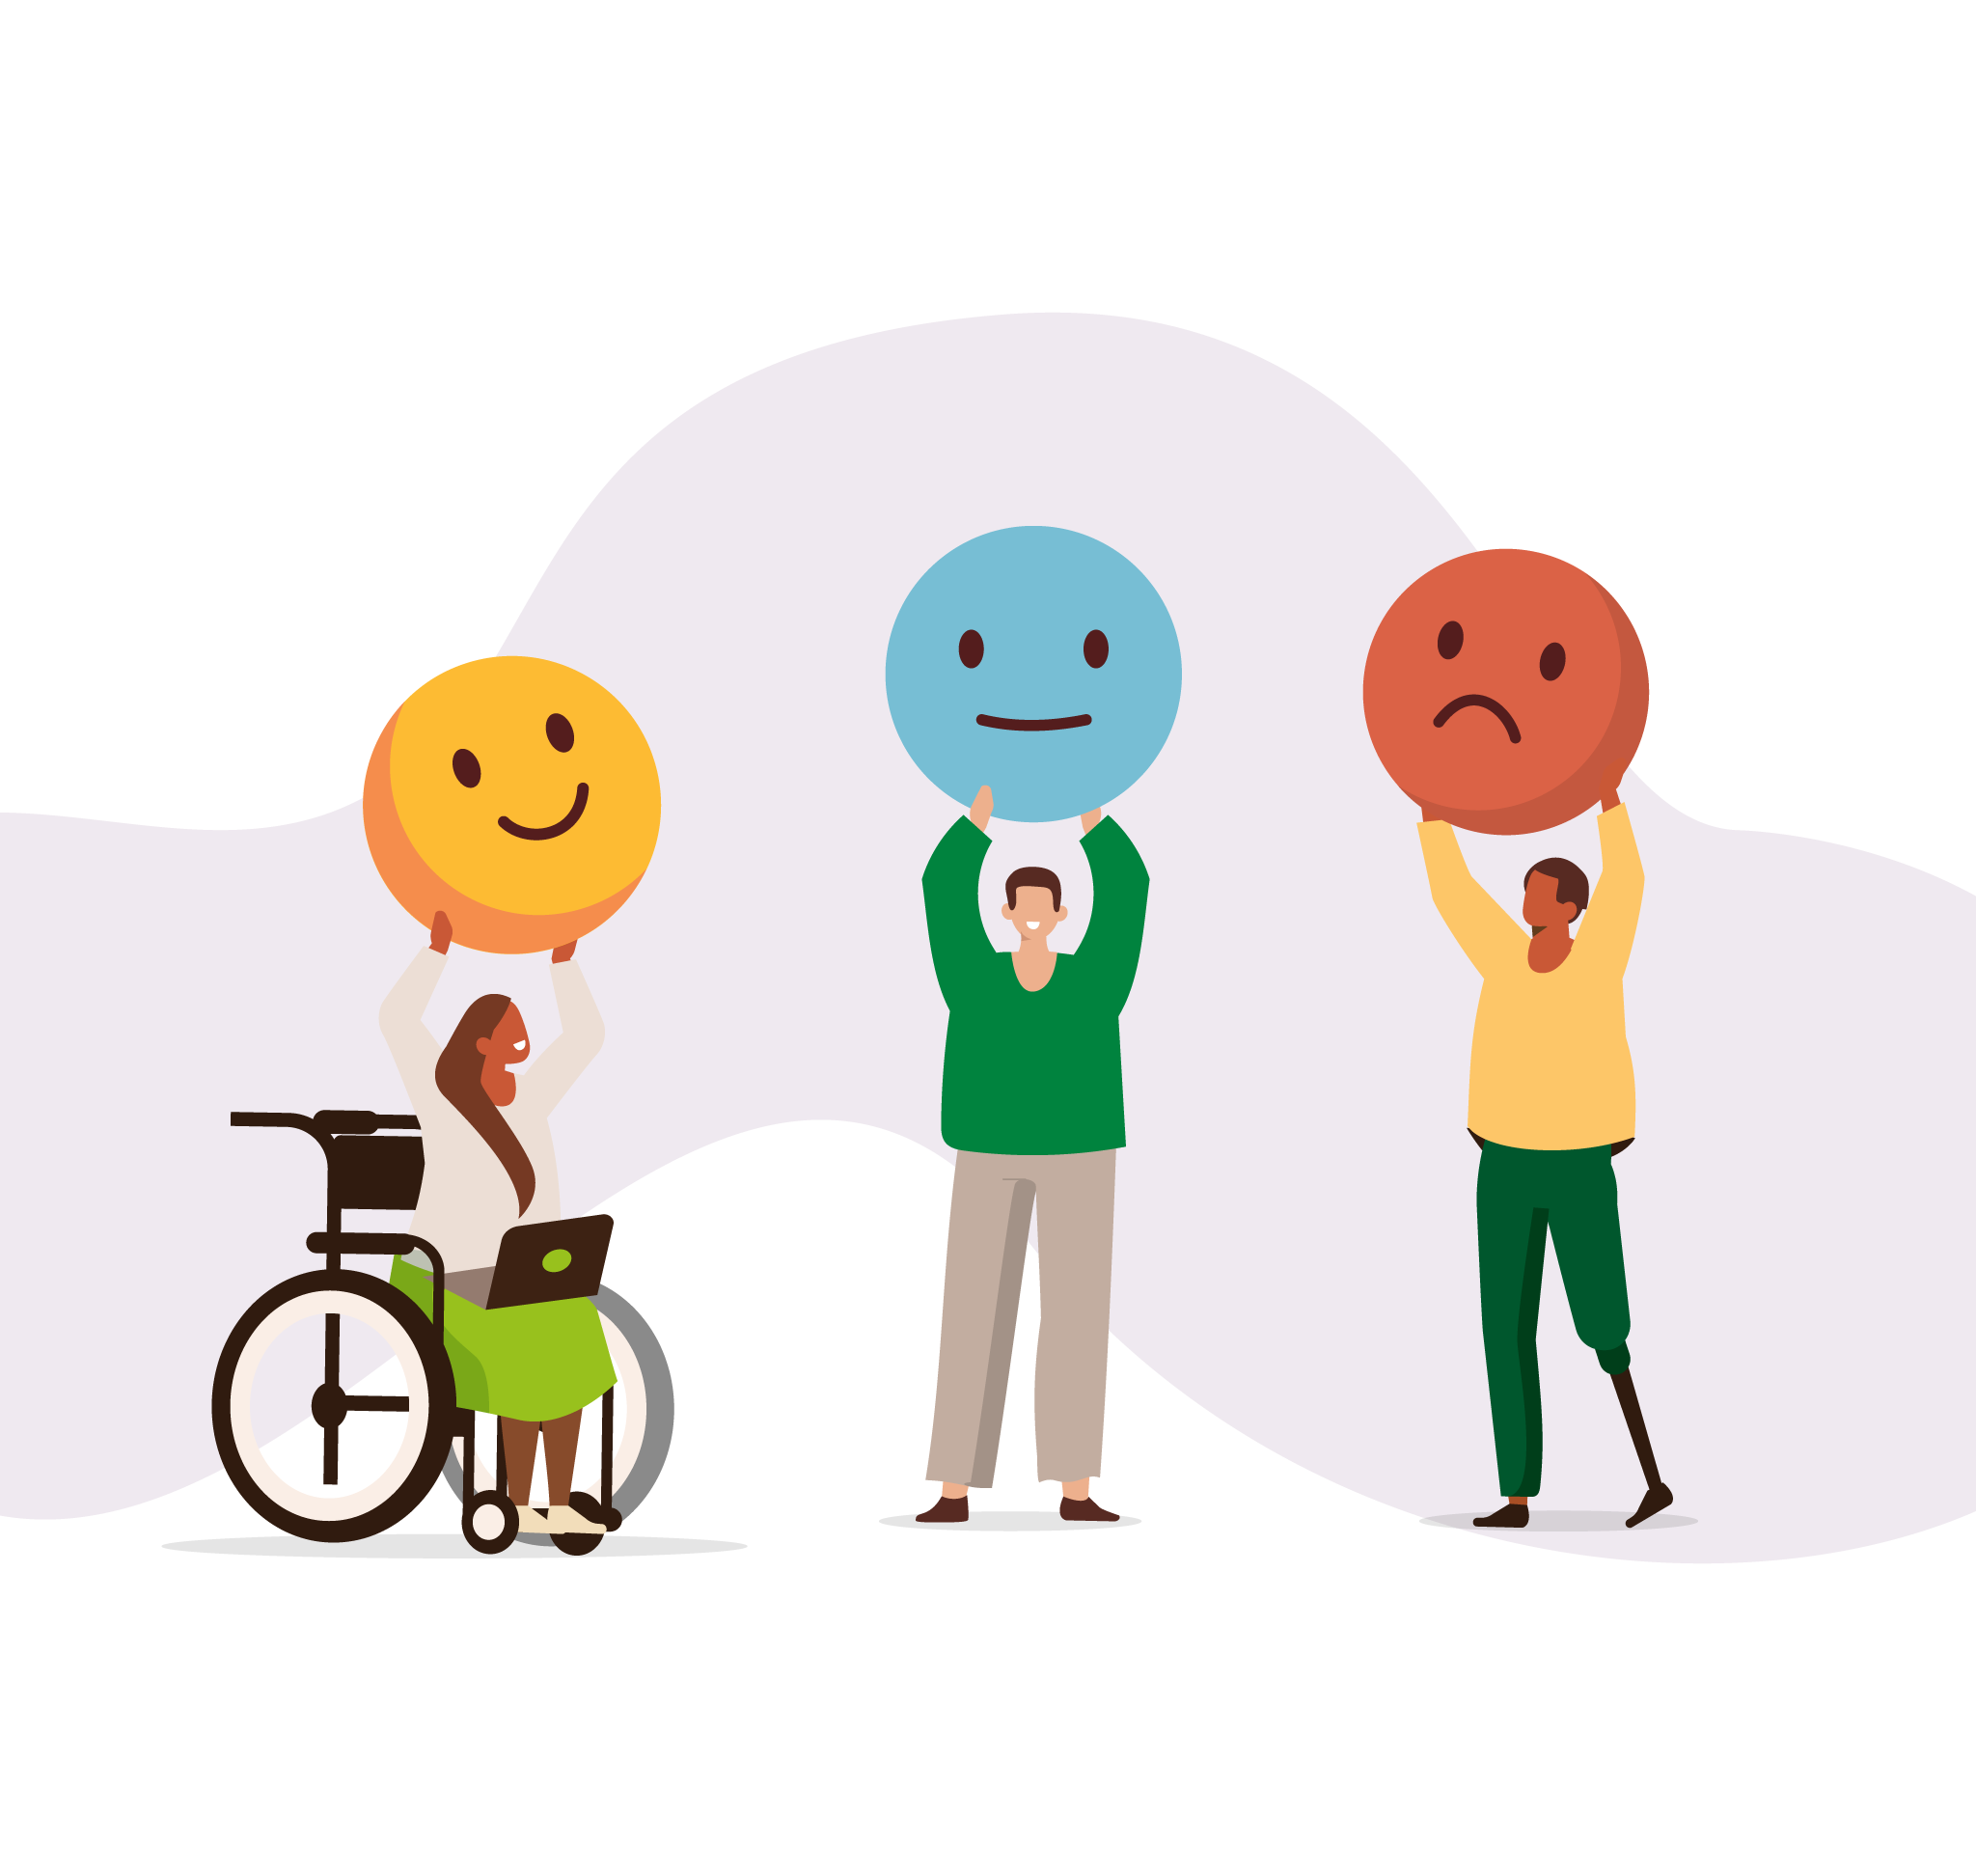 Cartoon image of three people, each holding an emoji above their heads - a smiley face, a neutral expression, and a sad face.